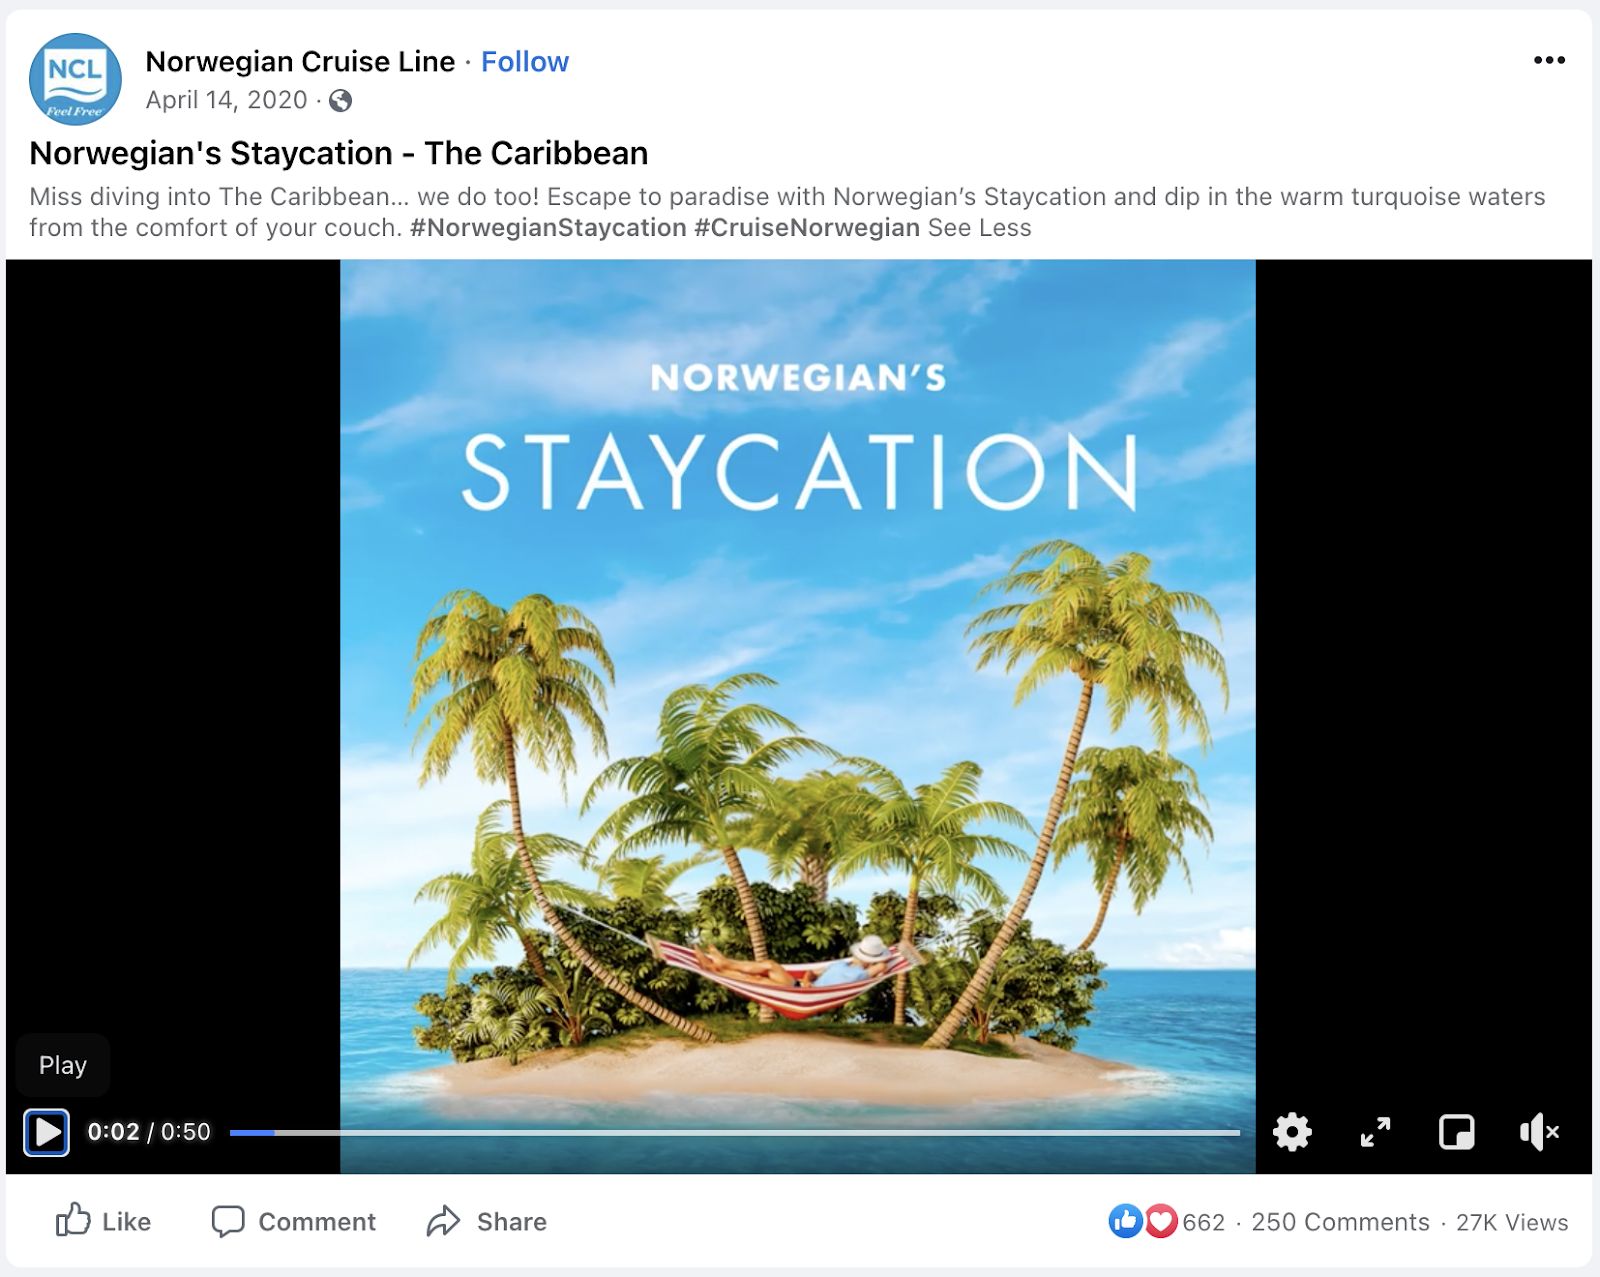 Norwegian staycation campaign